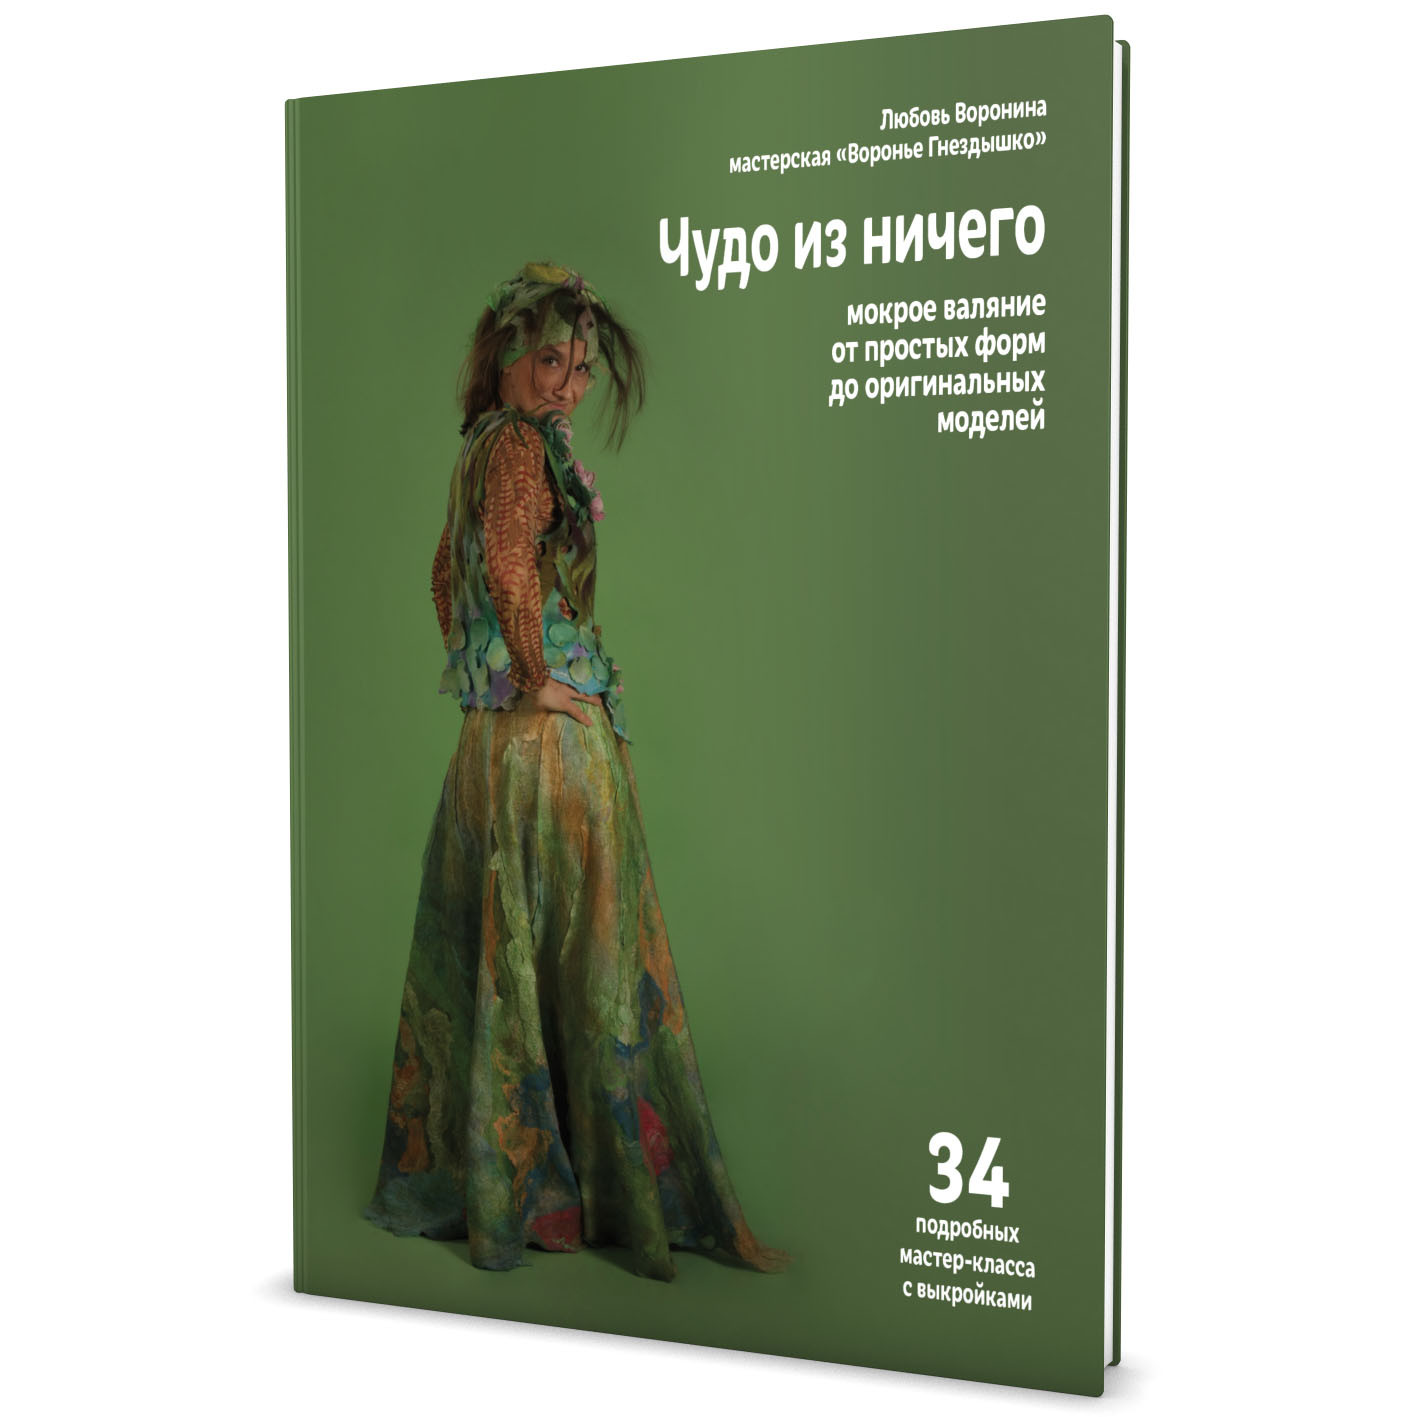 Lubov Voronina's "A miracle out of nothing" RUSSIAN EDITION